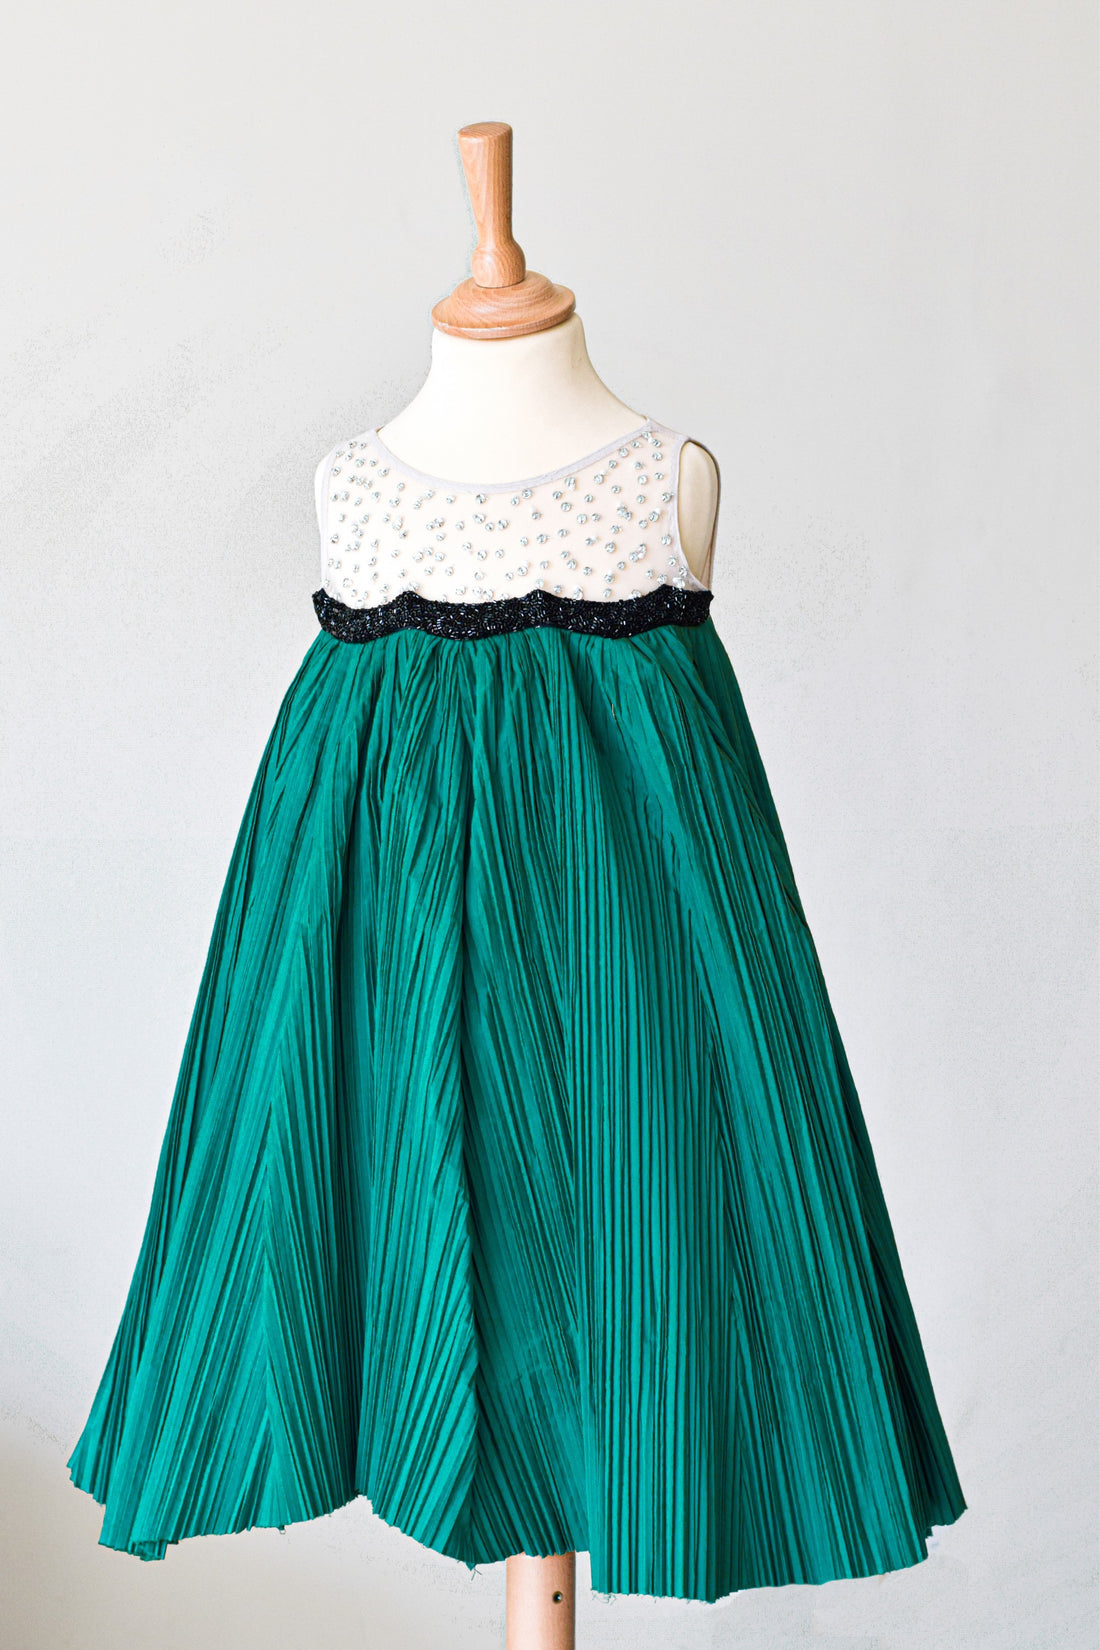 Scalloped Bodice With Pleated Panel Skirt